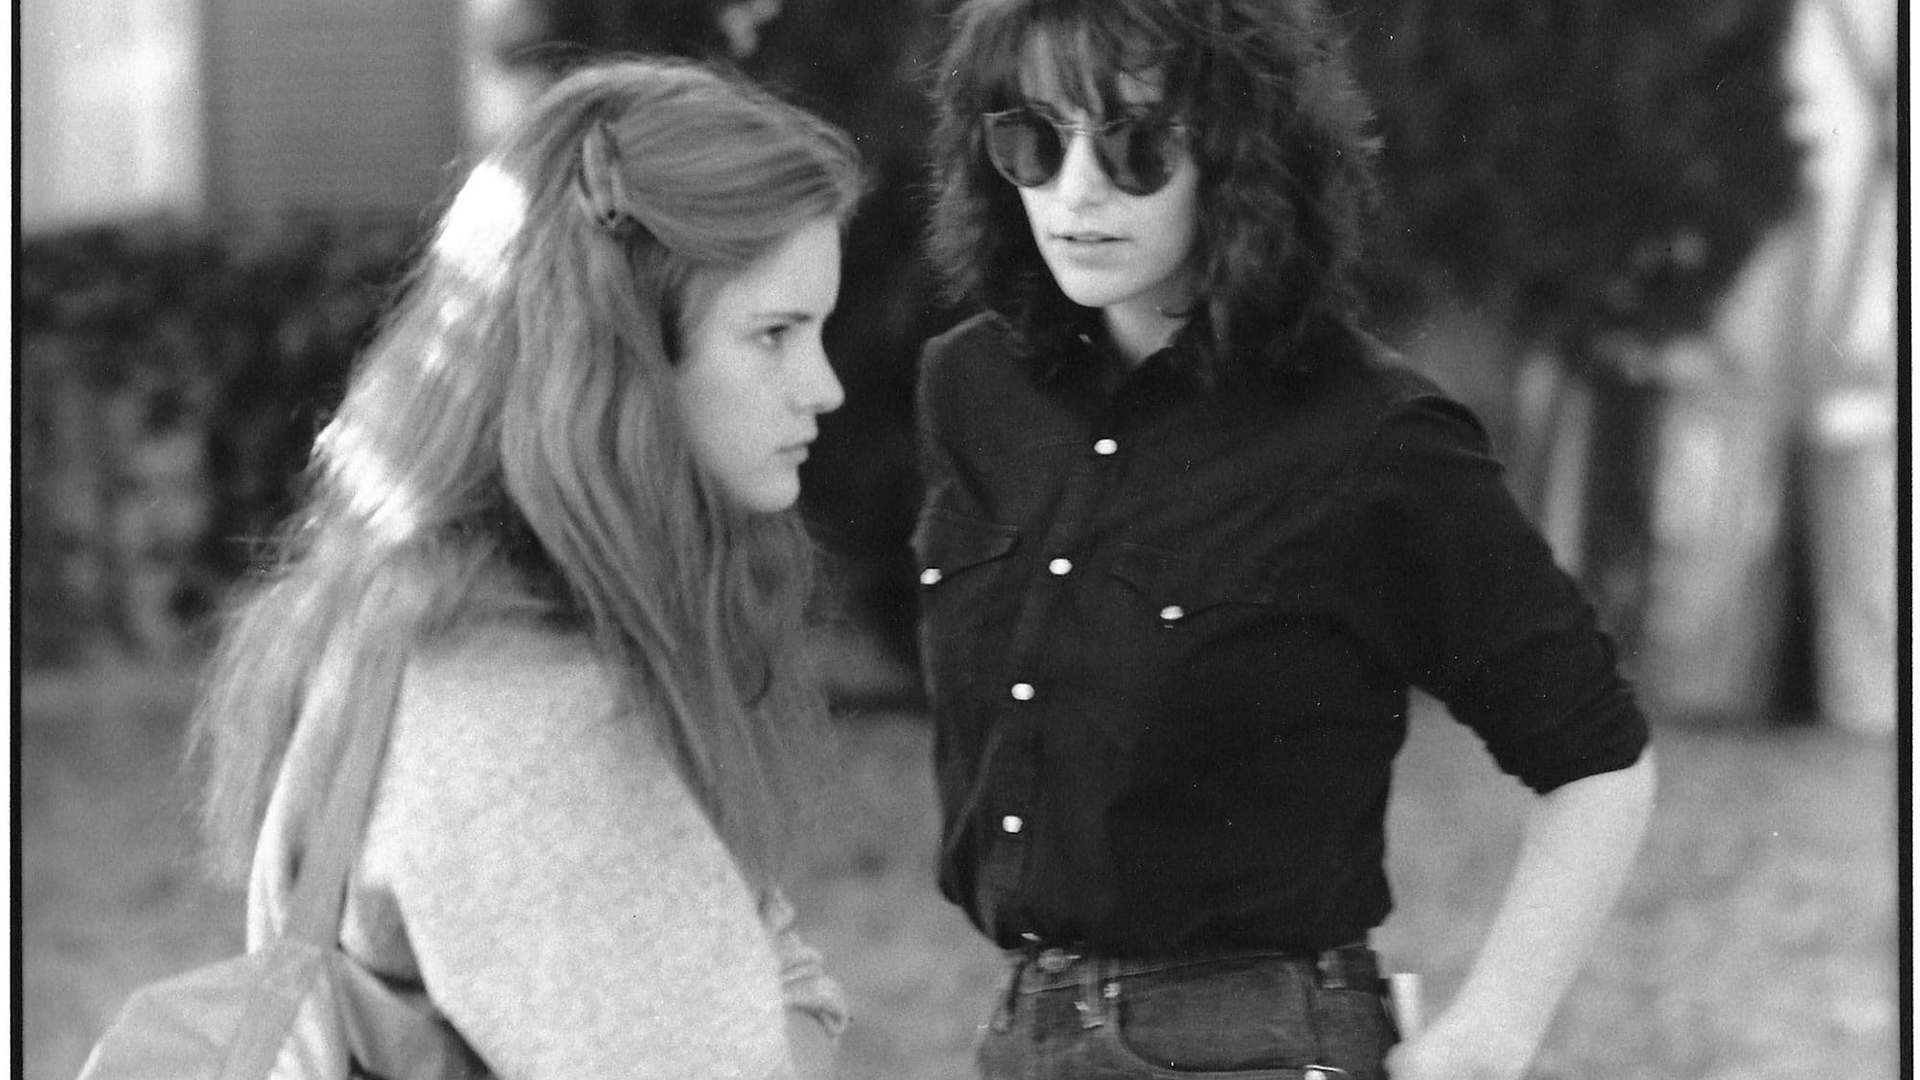 Jennifer Jason Leigh and Amy Heckerling on the set of Fast Times at Ridgemont High (1982)